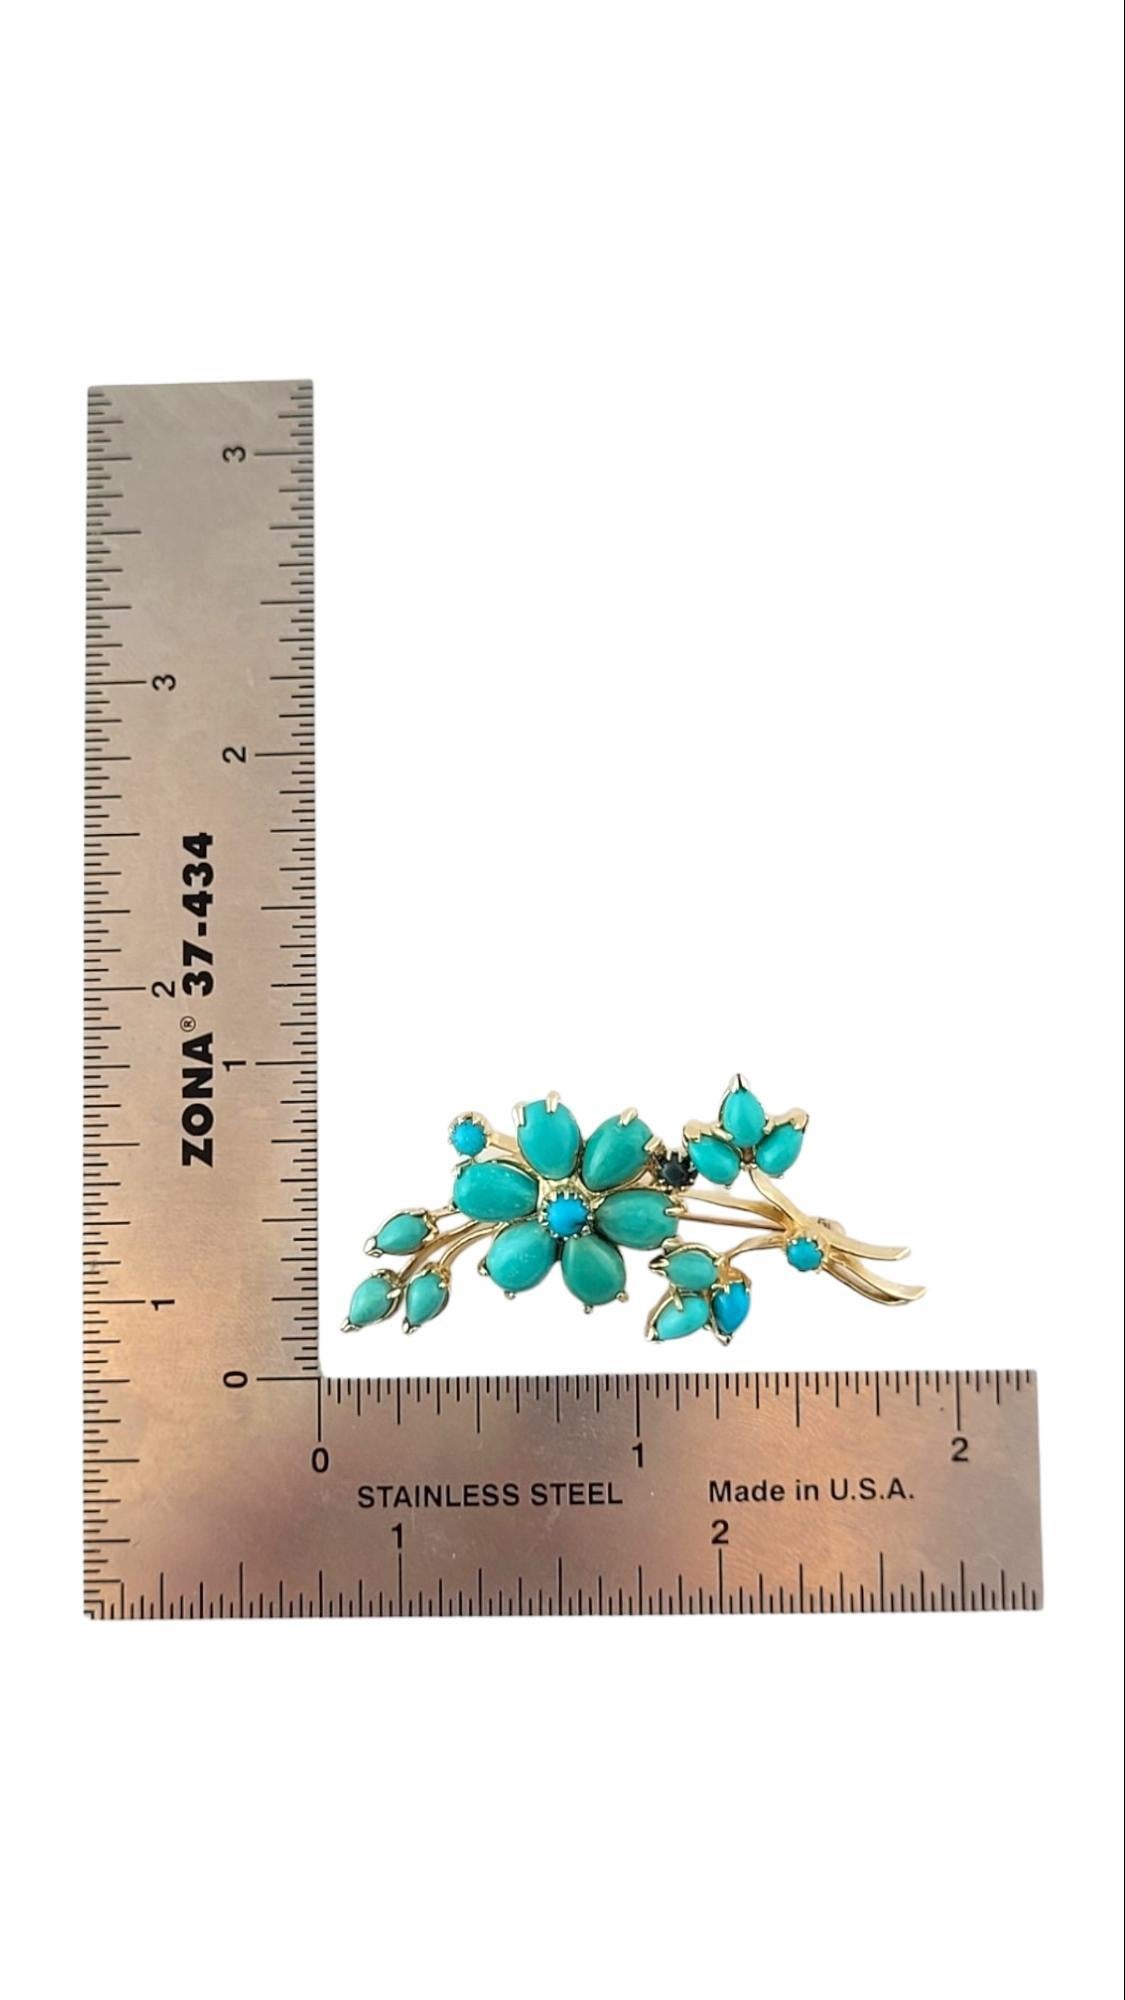 14K Yellow Gold Flower Pin with Turquoise Stones #15186 For Sale 2